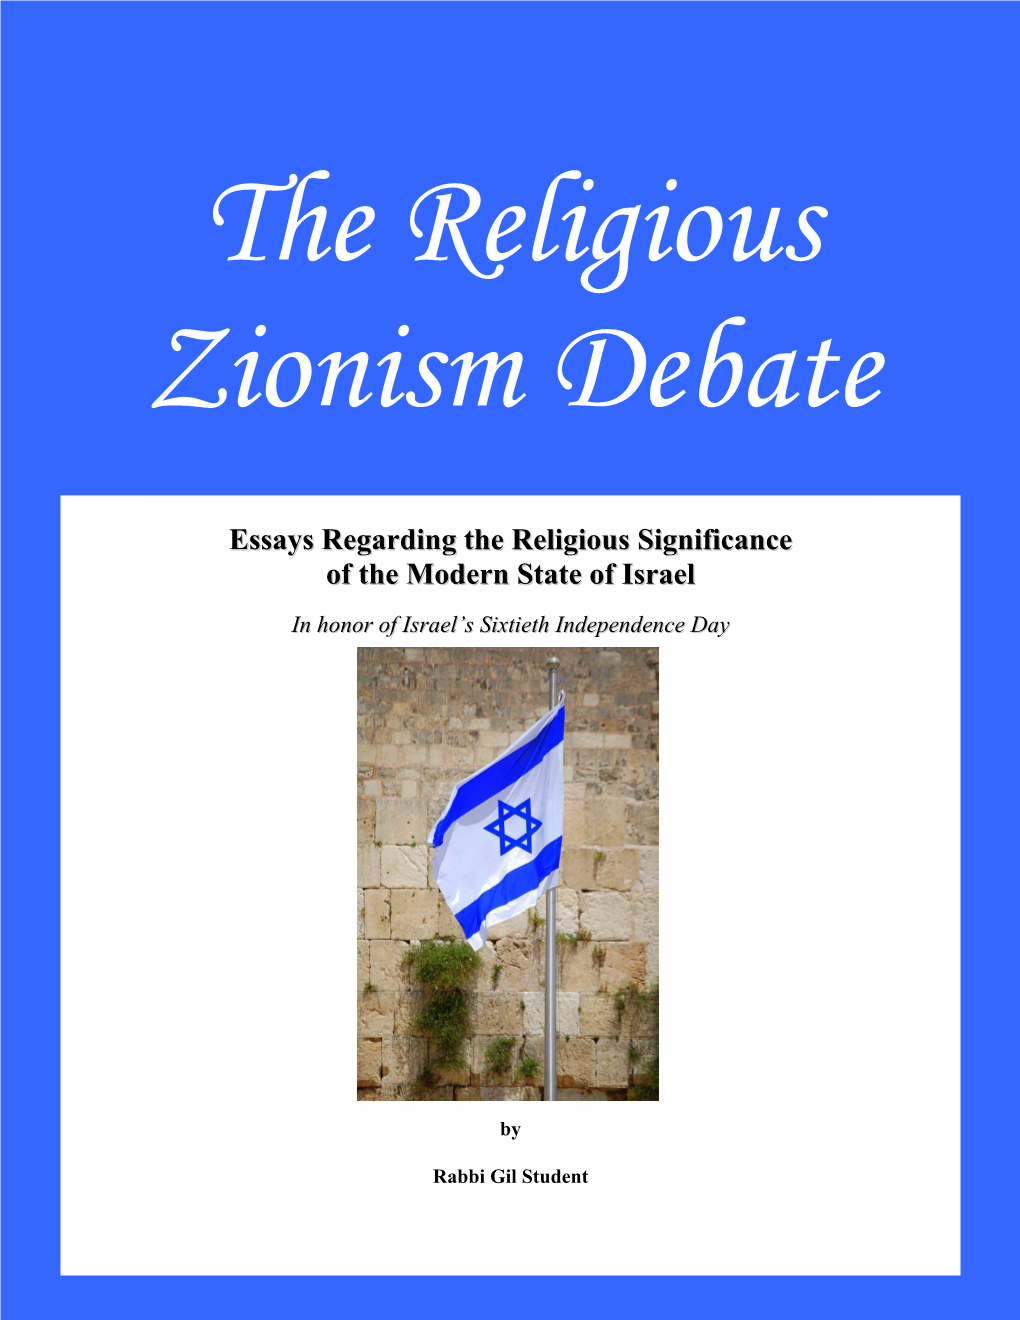 Essays Regarding the Religious Significance of the Modern State of Israel in Honor of Israel’S Sixtieth Independence Day